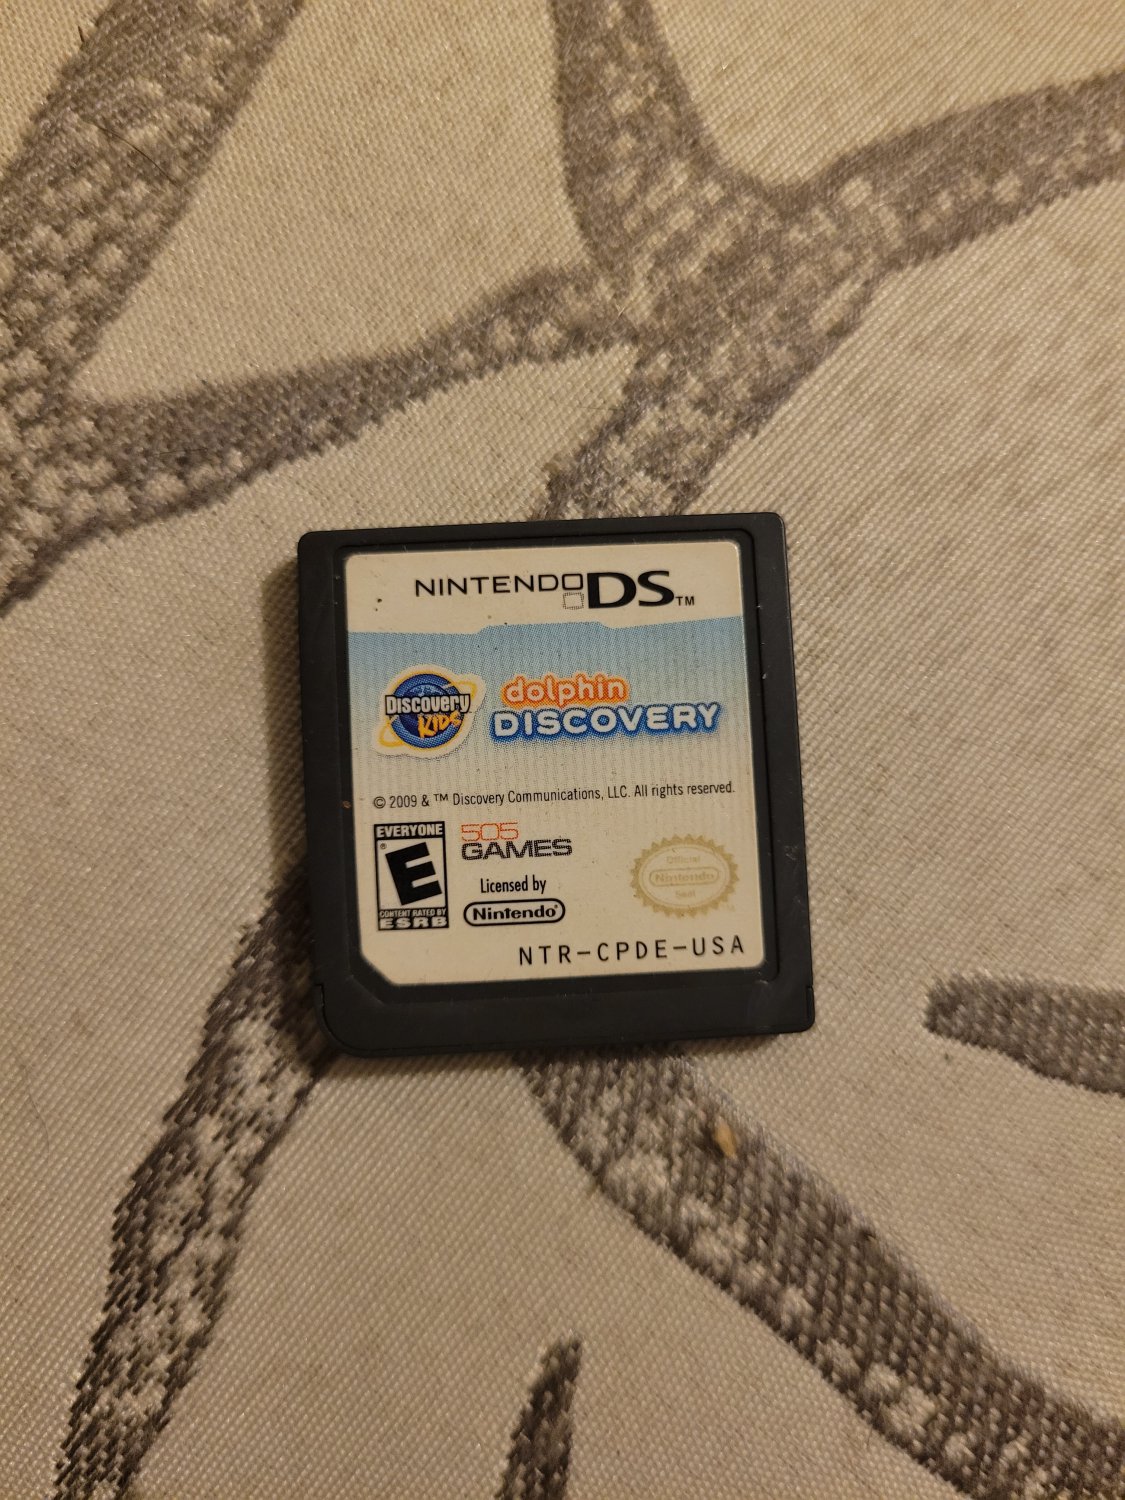 Nintendo DS Dolphin Discovery